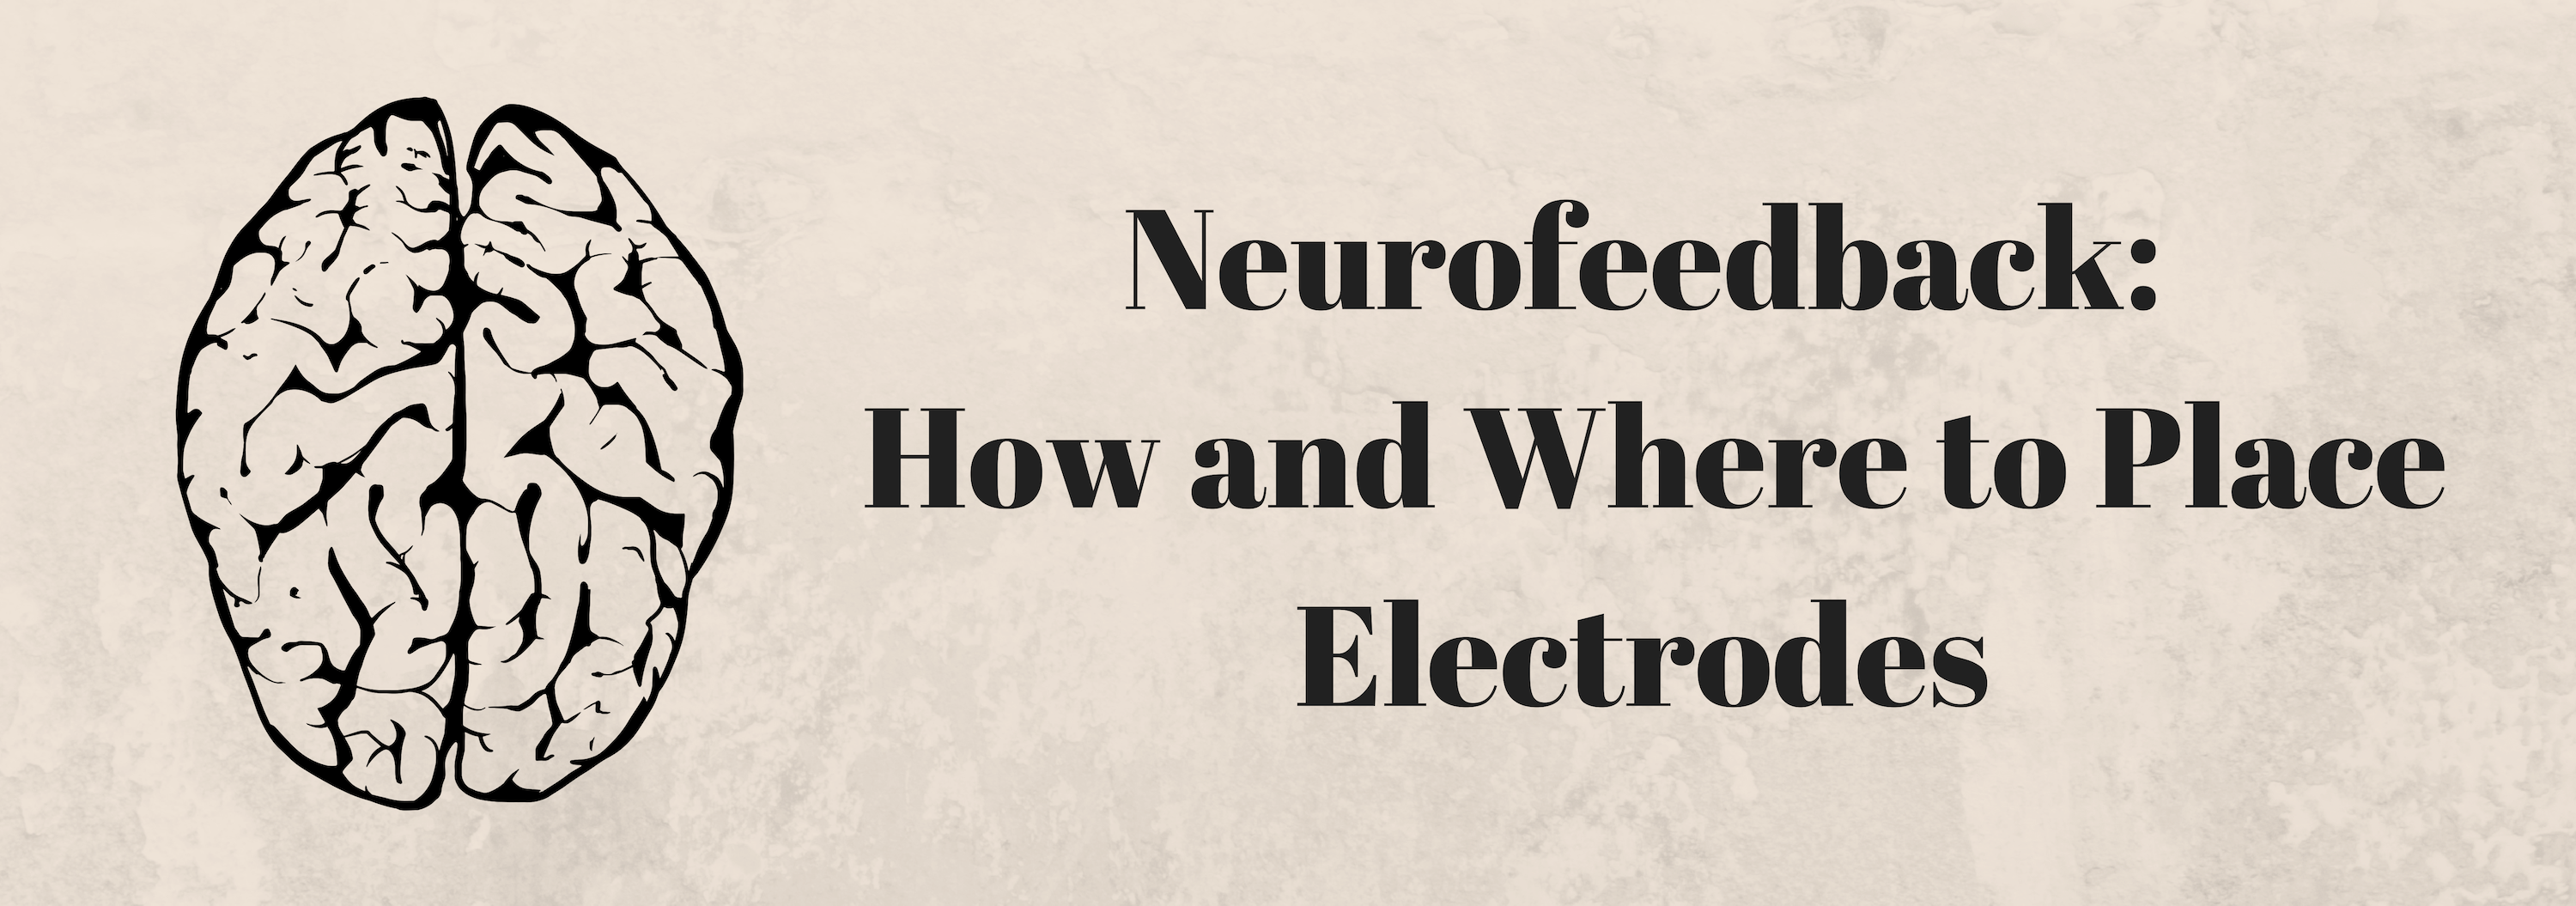 Neurofeedback: How and Where to Place Electrodes